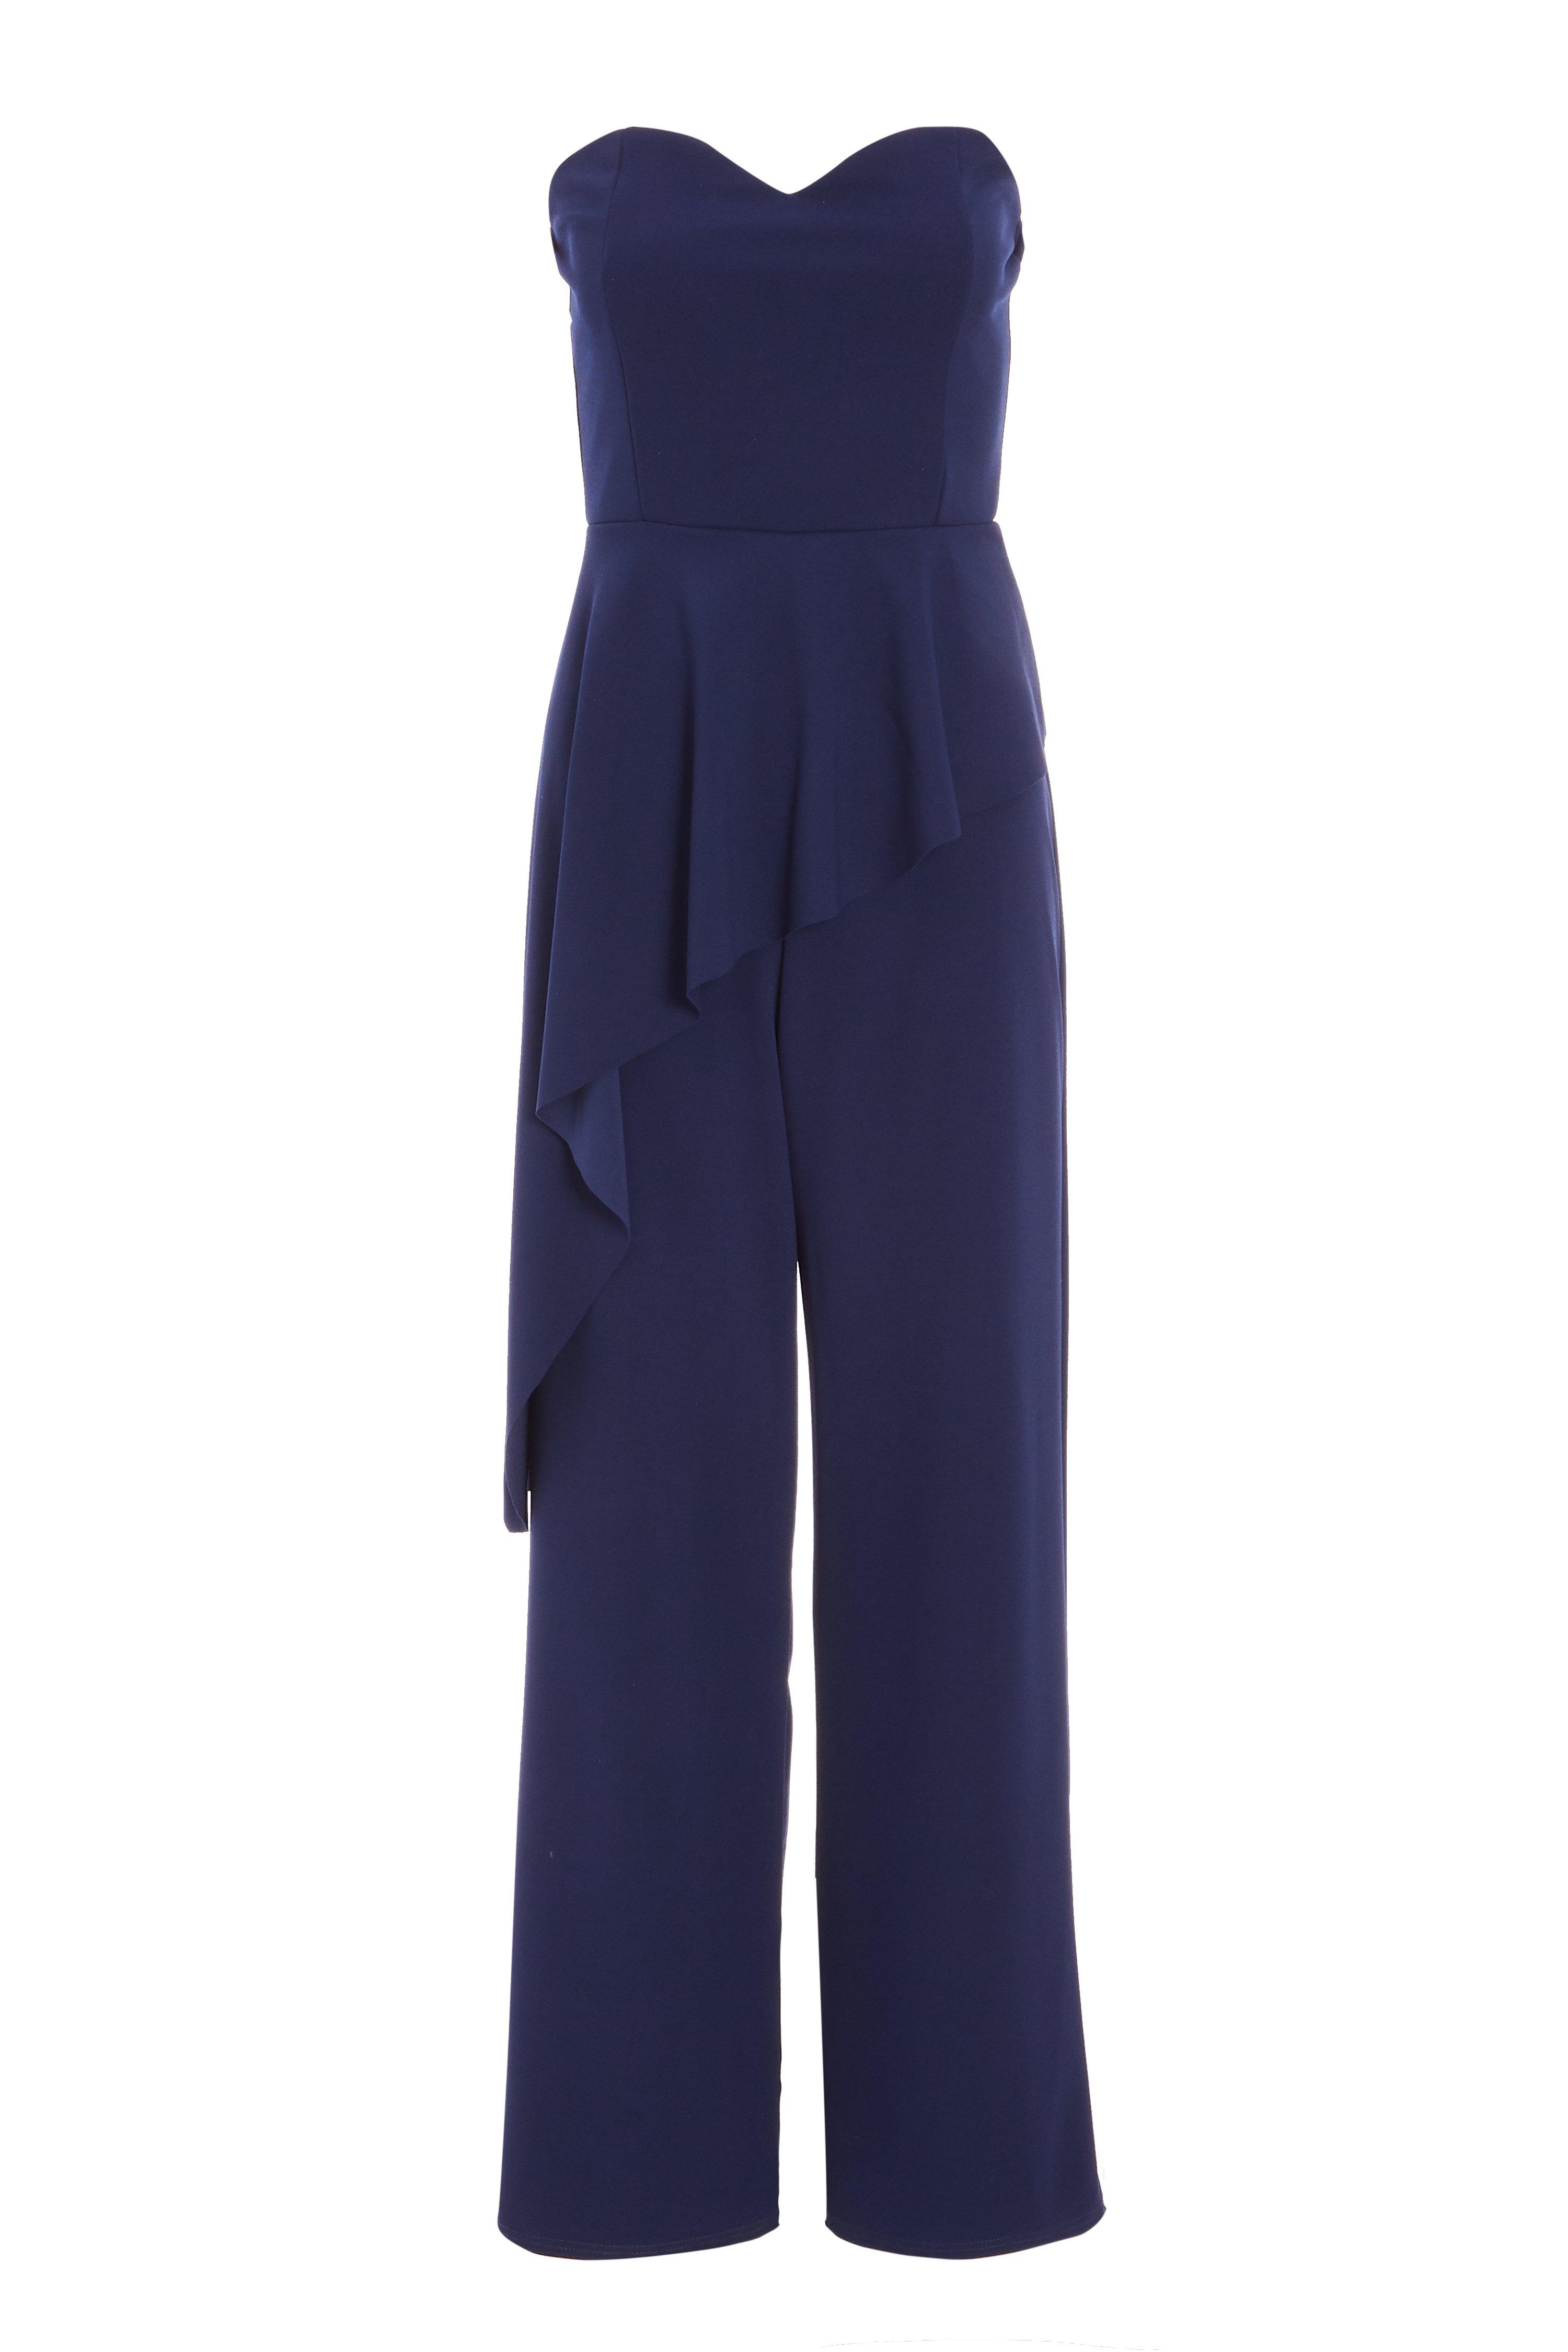 Navy Waterfall Bandeau Jumpsuit - Quiz Clothing